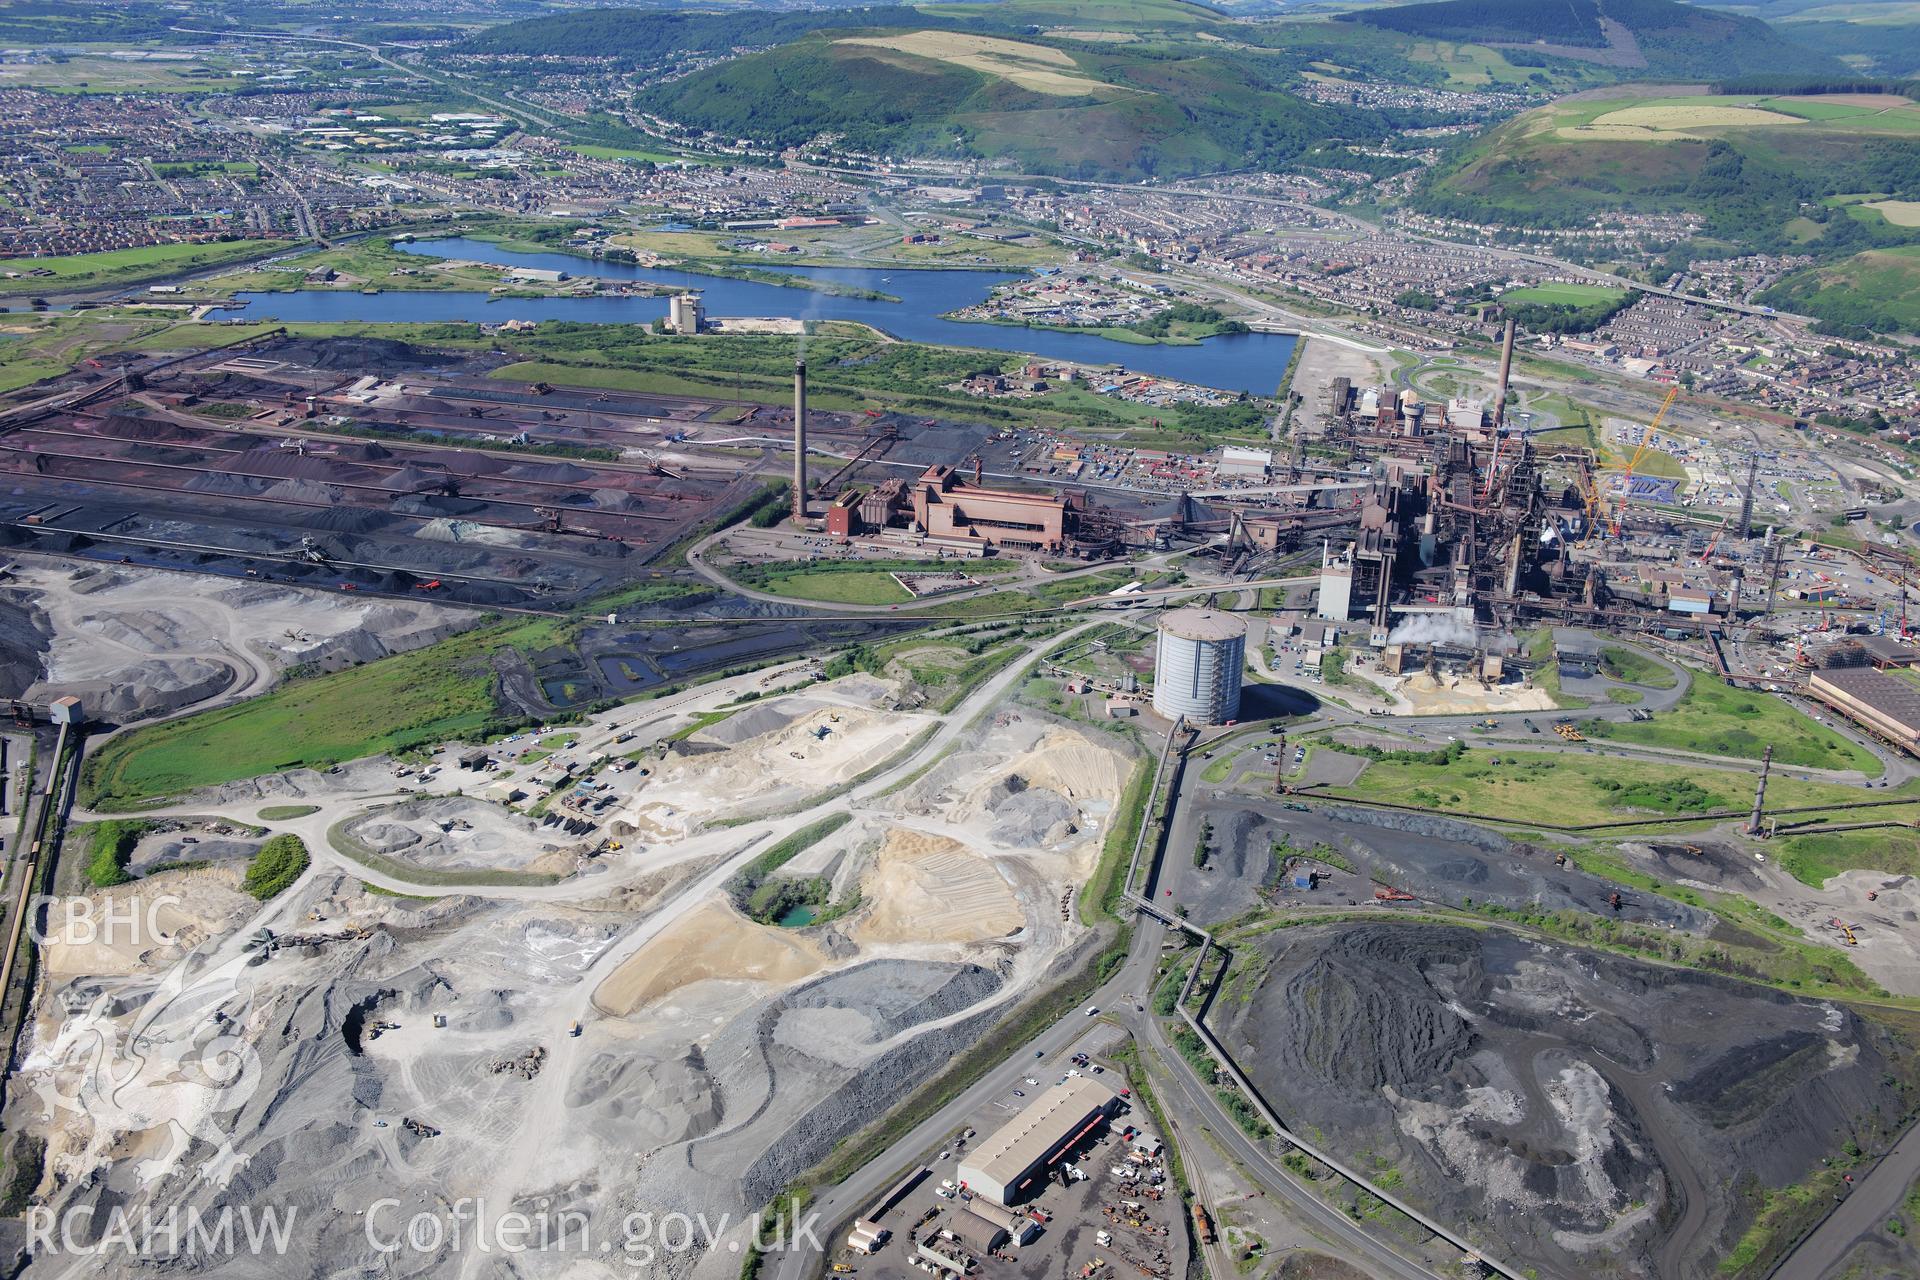 RCAHMW colour oblique photograph of Abbey Works, Margam Steelworks. Taken by Toby Driver on 24/07/2012.